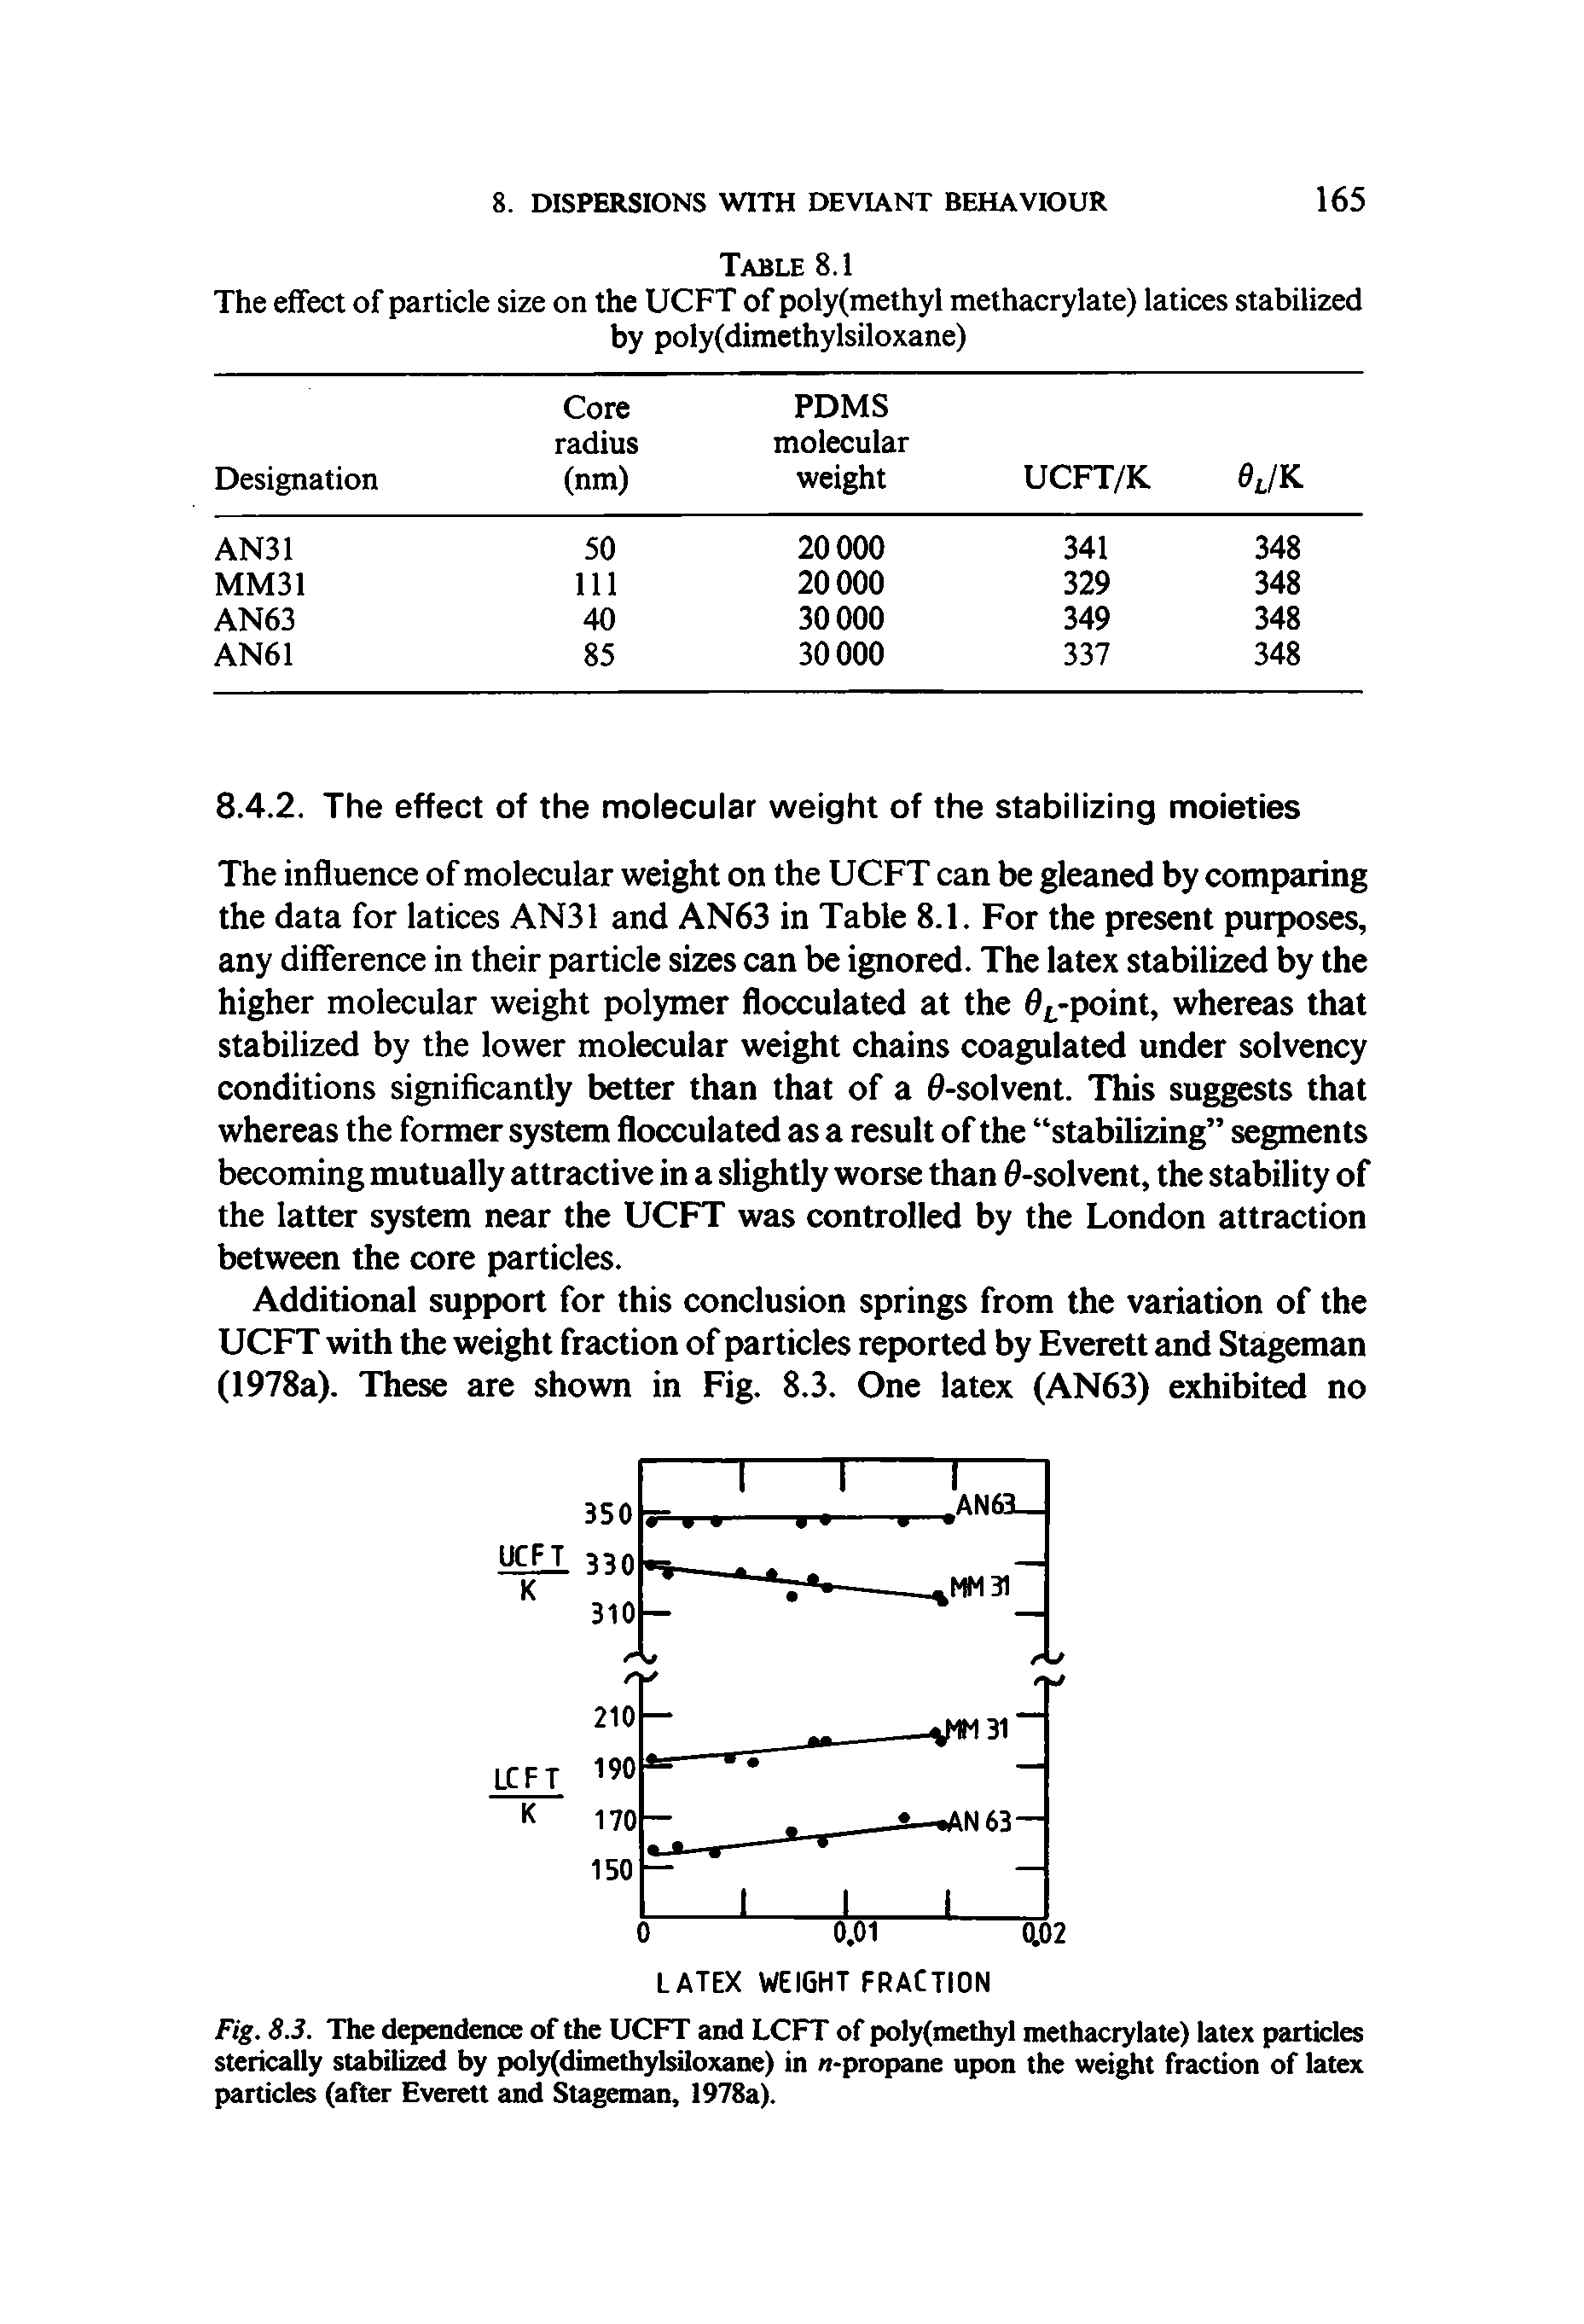 Fig. 8.3. The dependence of the UCFT and LCFT of polyfmethyl methacrylate) latex particles sterically stabilized by poly(dimethyl oxane) in n-propane upon the weight fraction of latex particles (after Everett and Stageman, 1978a).